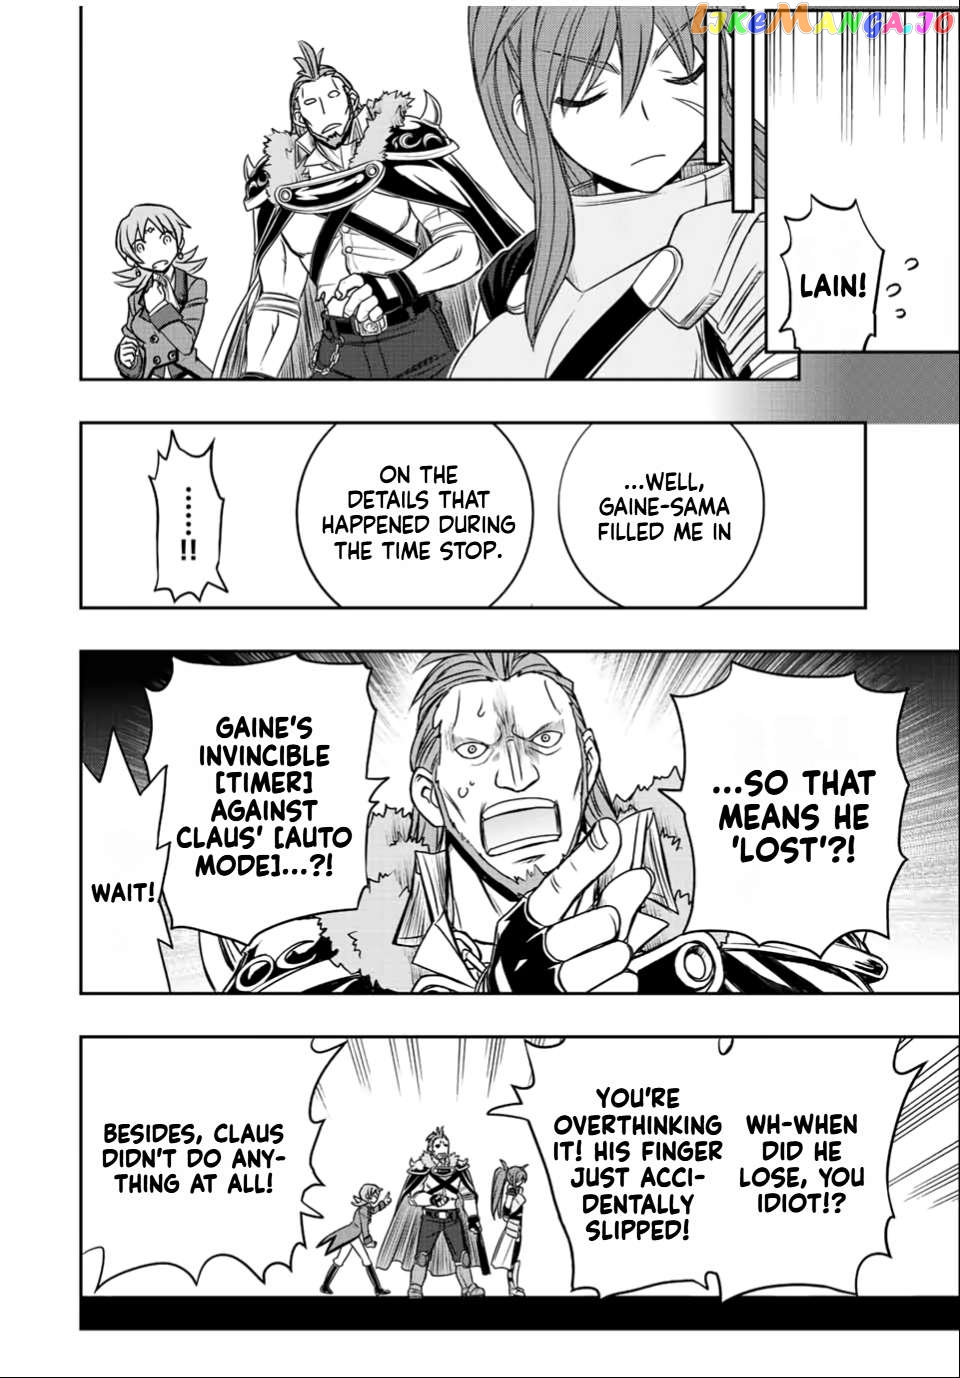 The Useless Skill [Auto Mode] Has Been Awakened ~Huh, Guild's Scout, Didn't You Say I Wasn't Needed Anymore?~ Chapter 31 - page 18